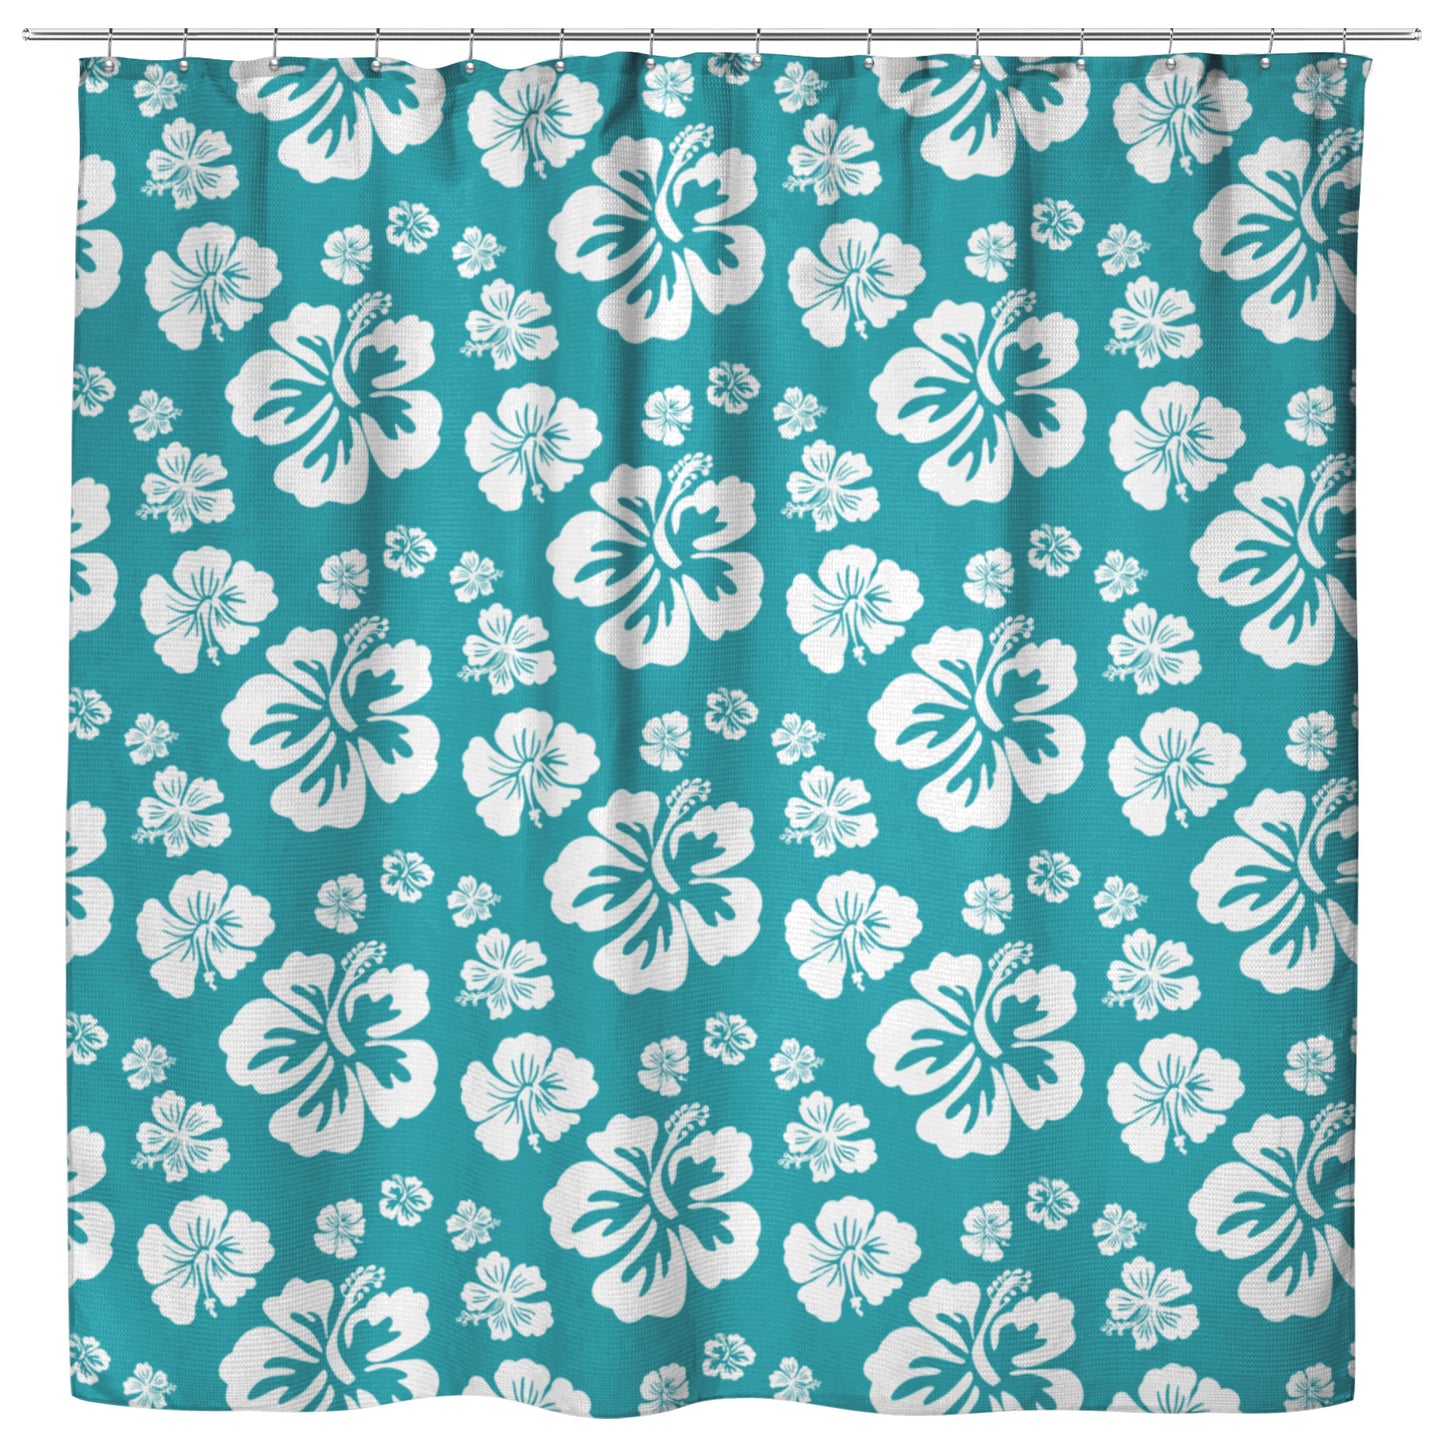 Hibiscus Soiree, White Hibiscus on Teal, Shower Curtain